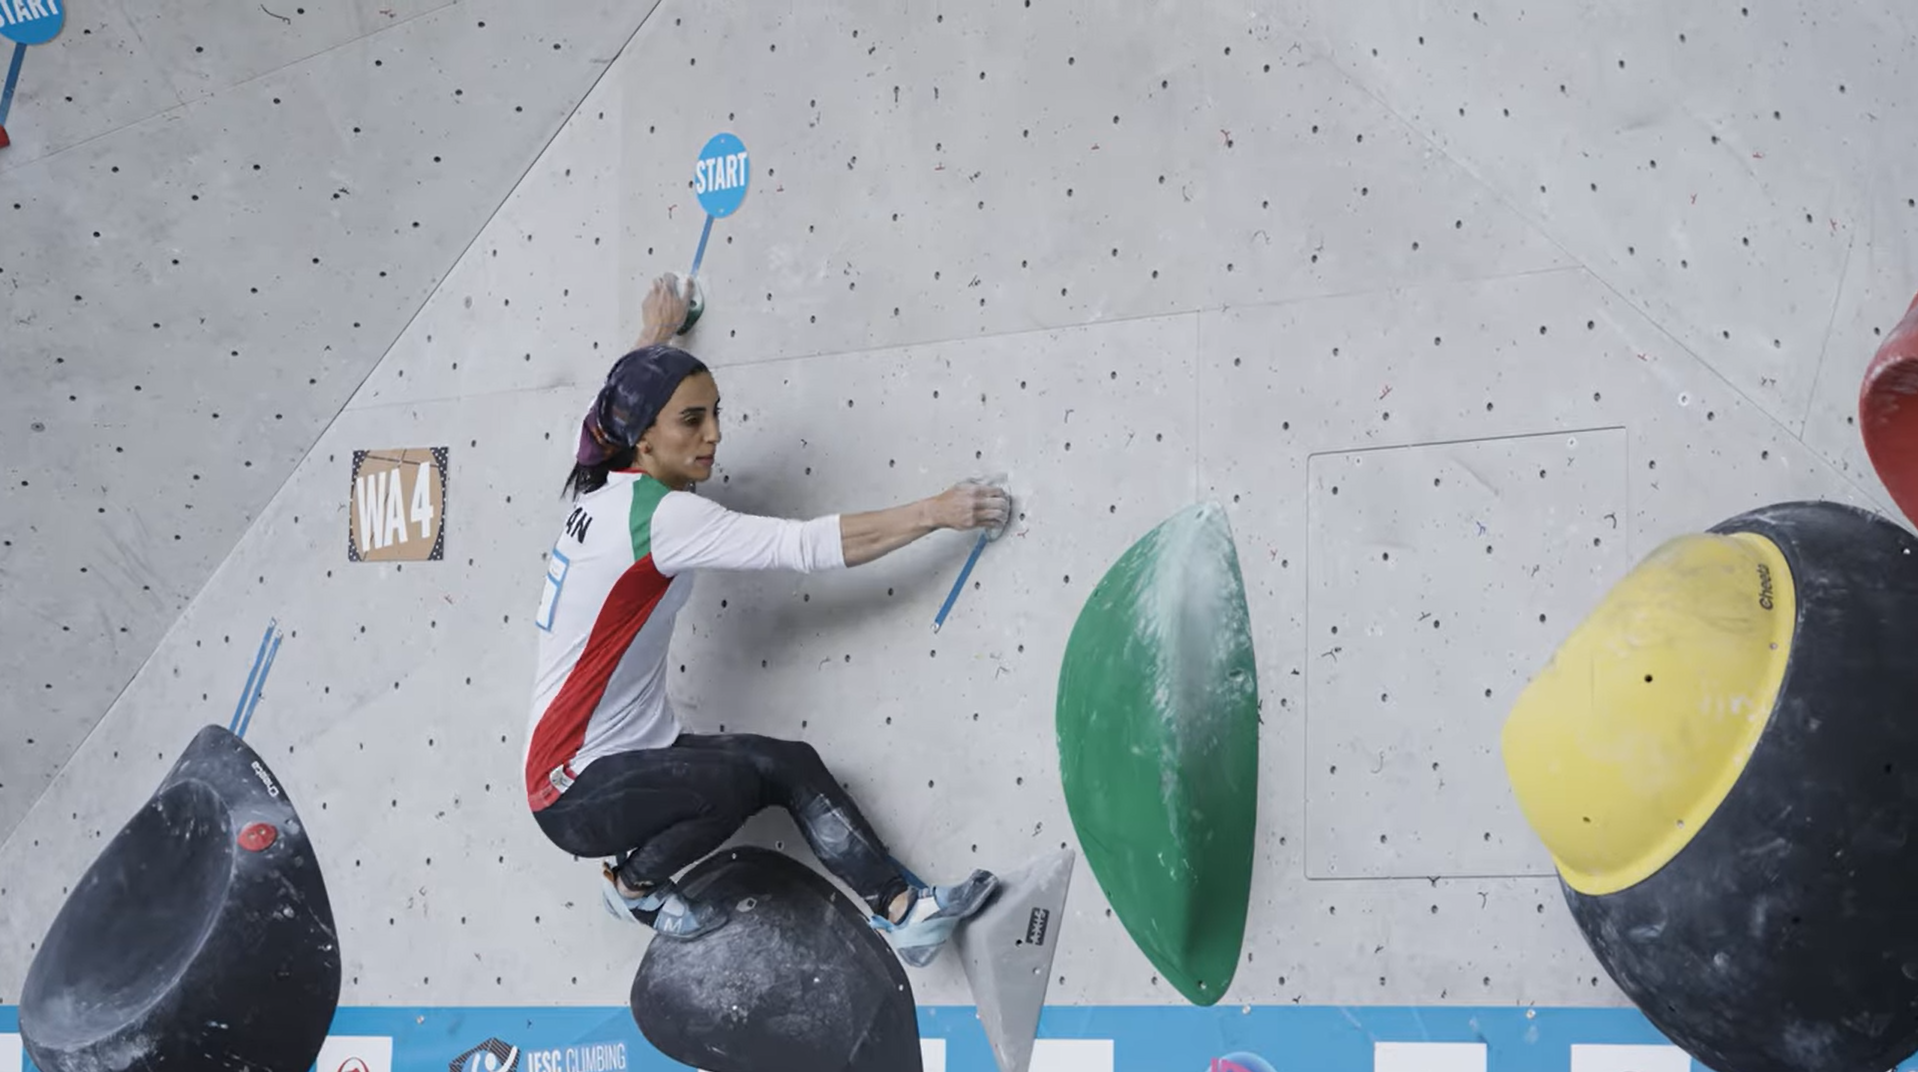 Iranian climber Rekabi returns to international competition after concerns for safety